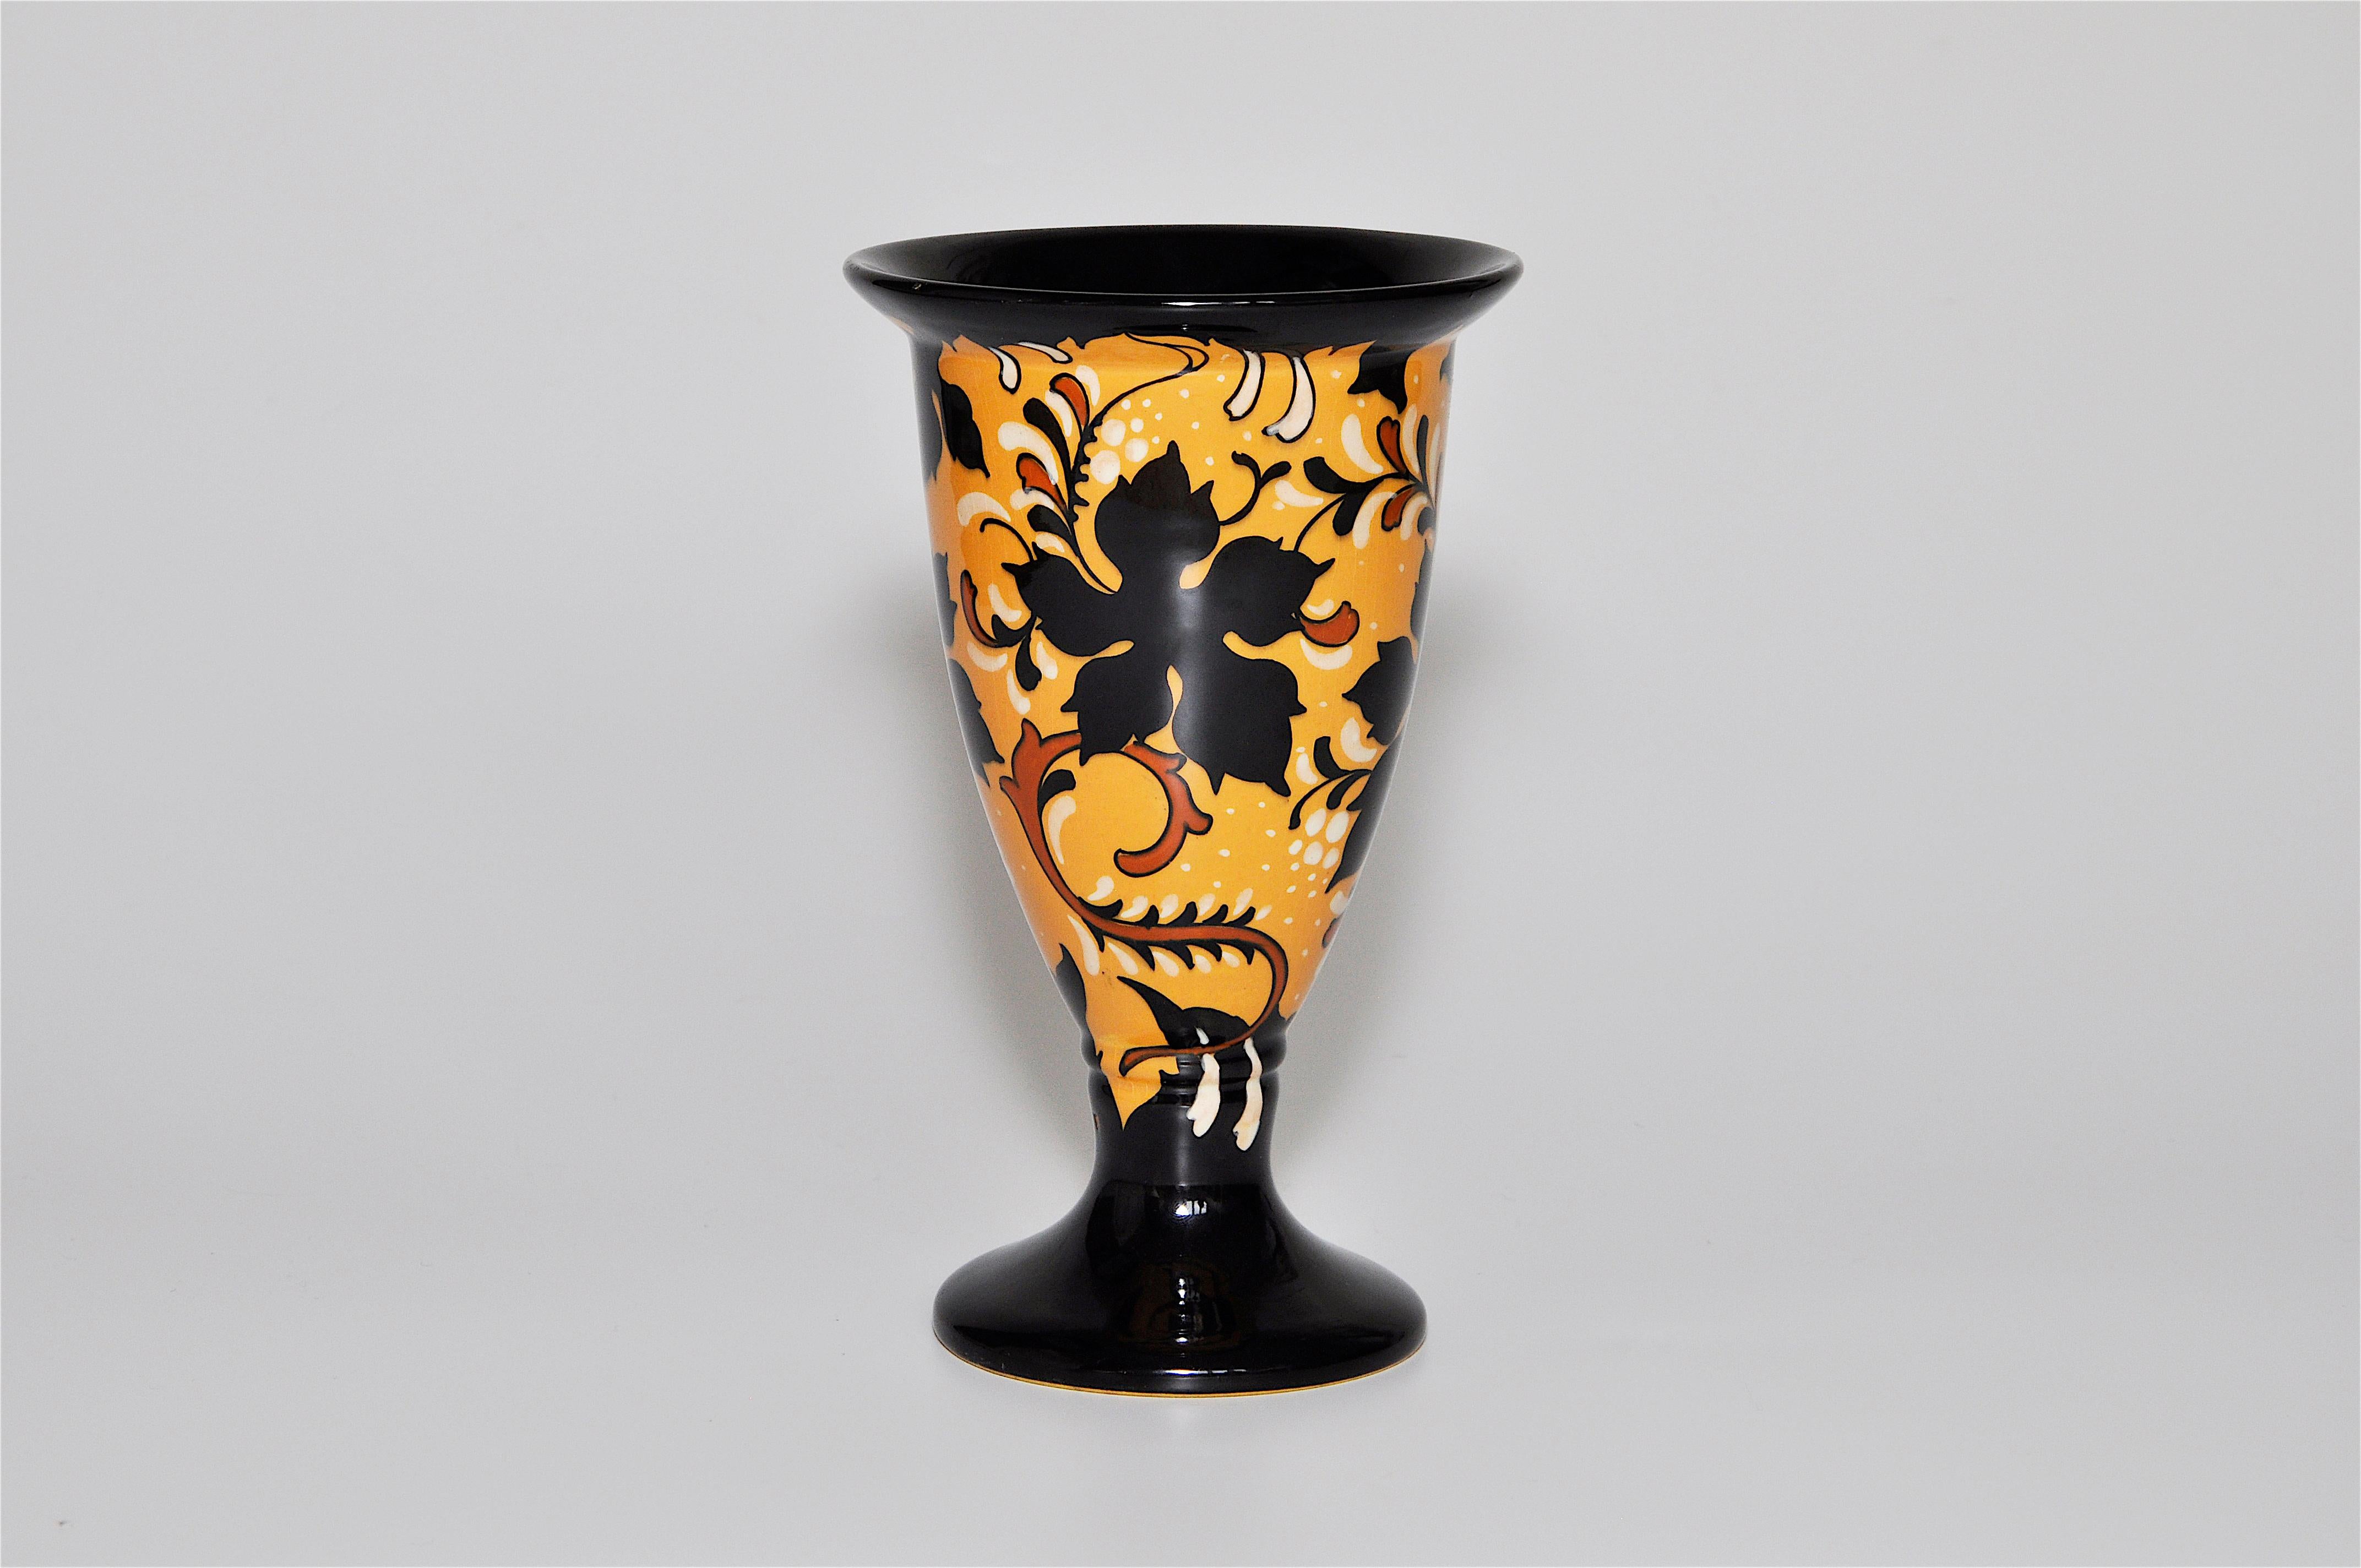 Yellow and black floral Dutch Gouda Art Nouveau Regina pottery ceramic pot vase 

It has an elegant classical poise that is very unique. A sophisticated stylized Art Nouveau floral and leaf organic design with a high gloss finish. The body has a